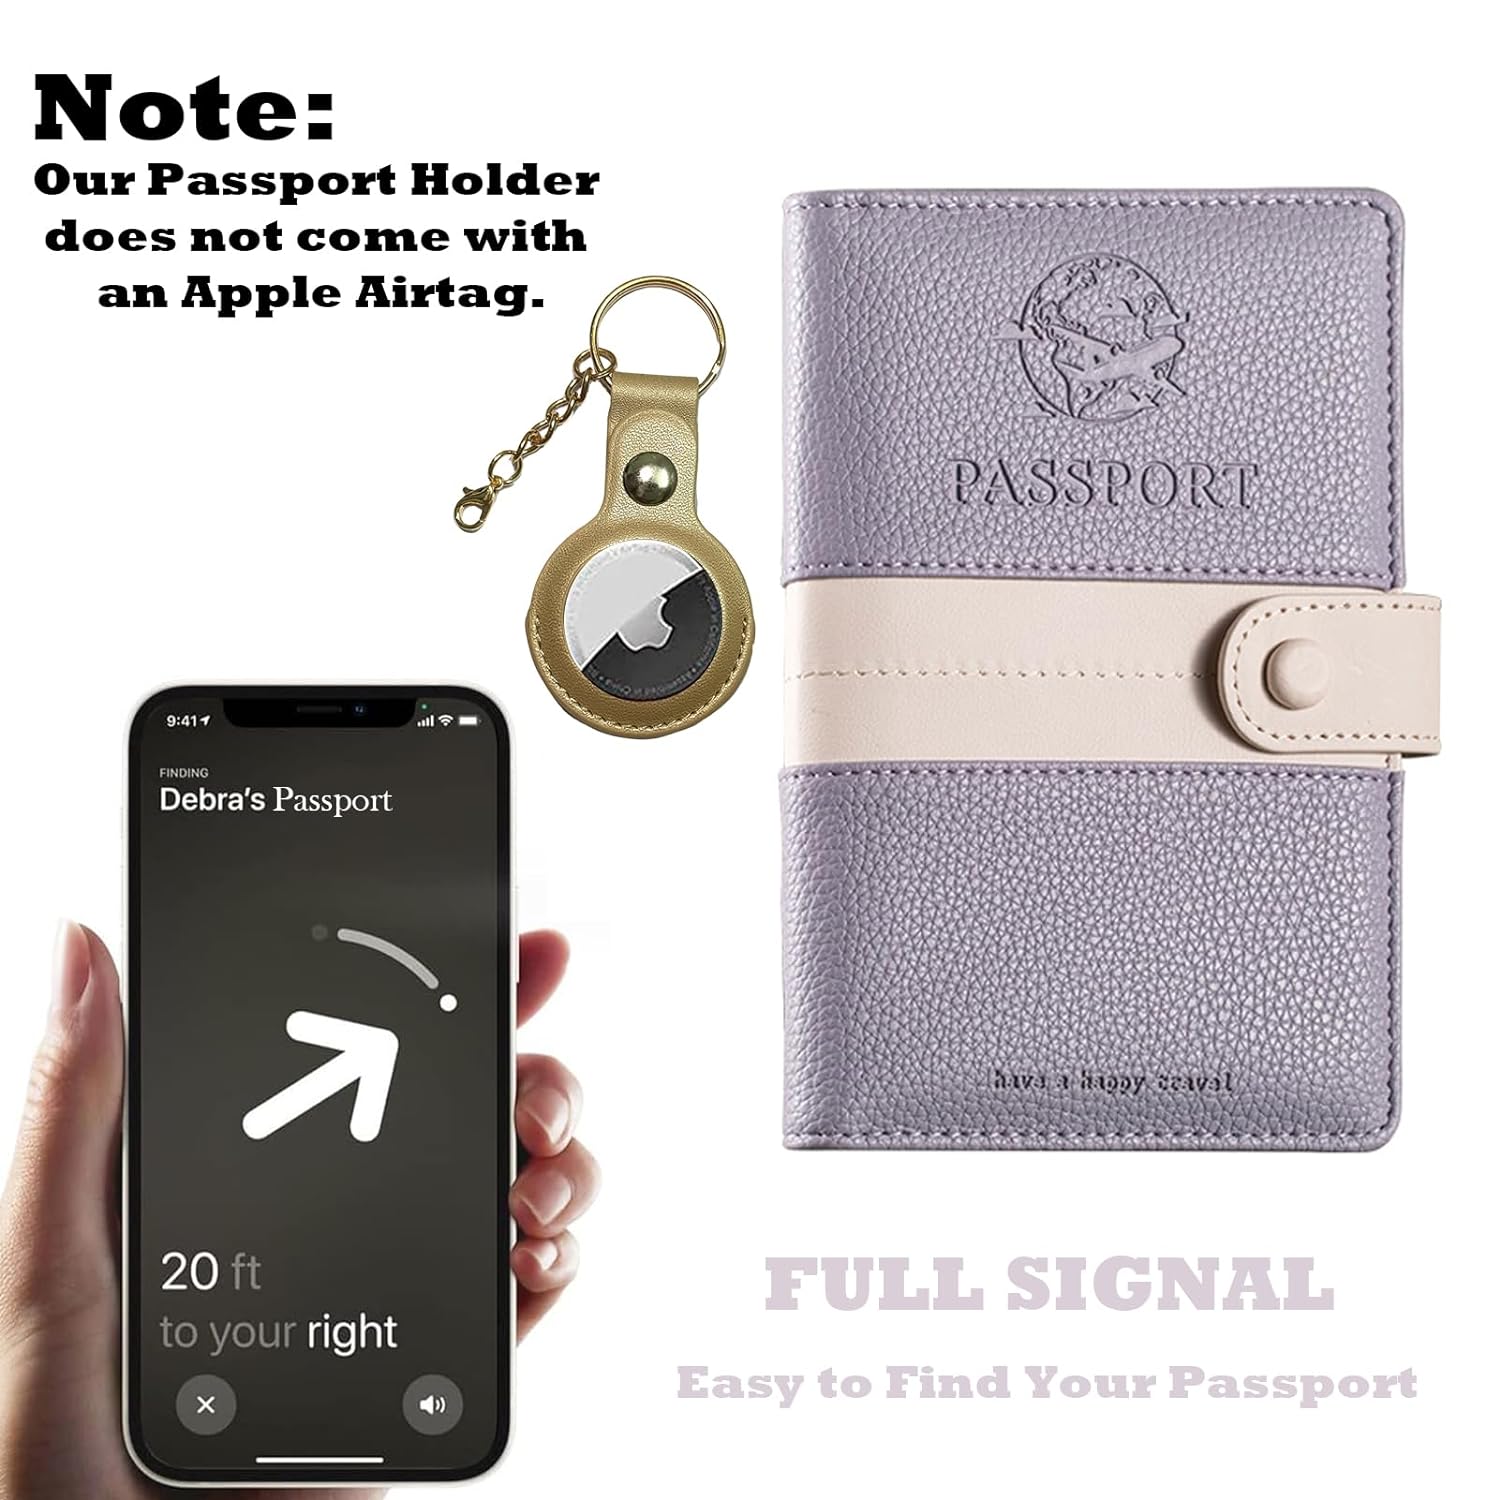 JoyChoi RFID Passport Holder with Airtag, PU Leather Passport Cover, Travel Wallet with Zipper Pocket, Pen Slot & SIM Card Ejector Tool, Essential Travel Accessories, Purple., Purple, Rfid Blocking Family Passport Zip Wallet